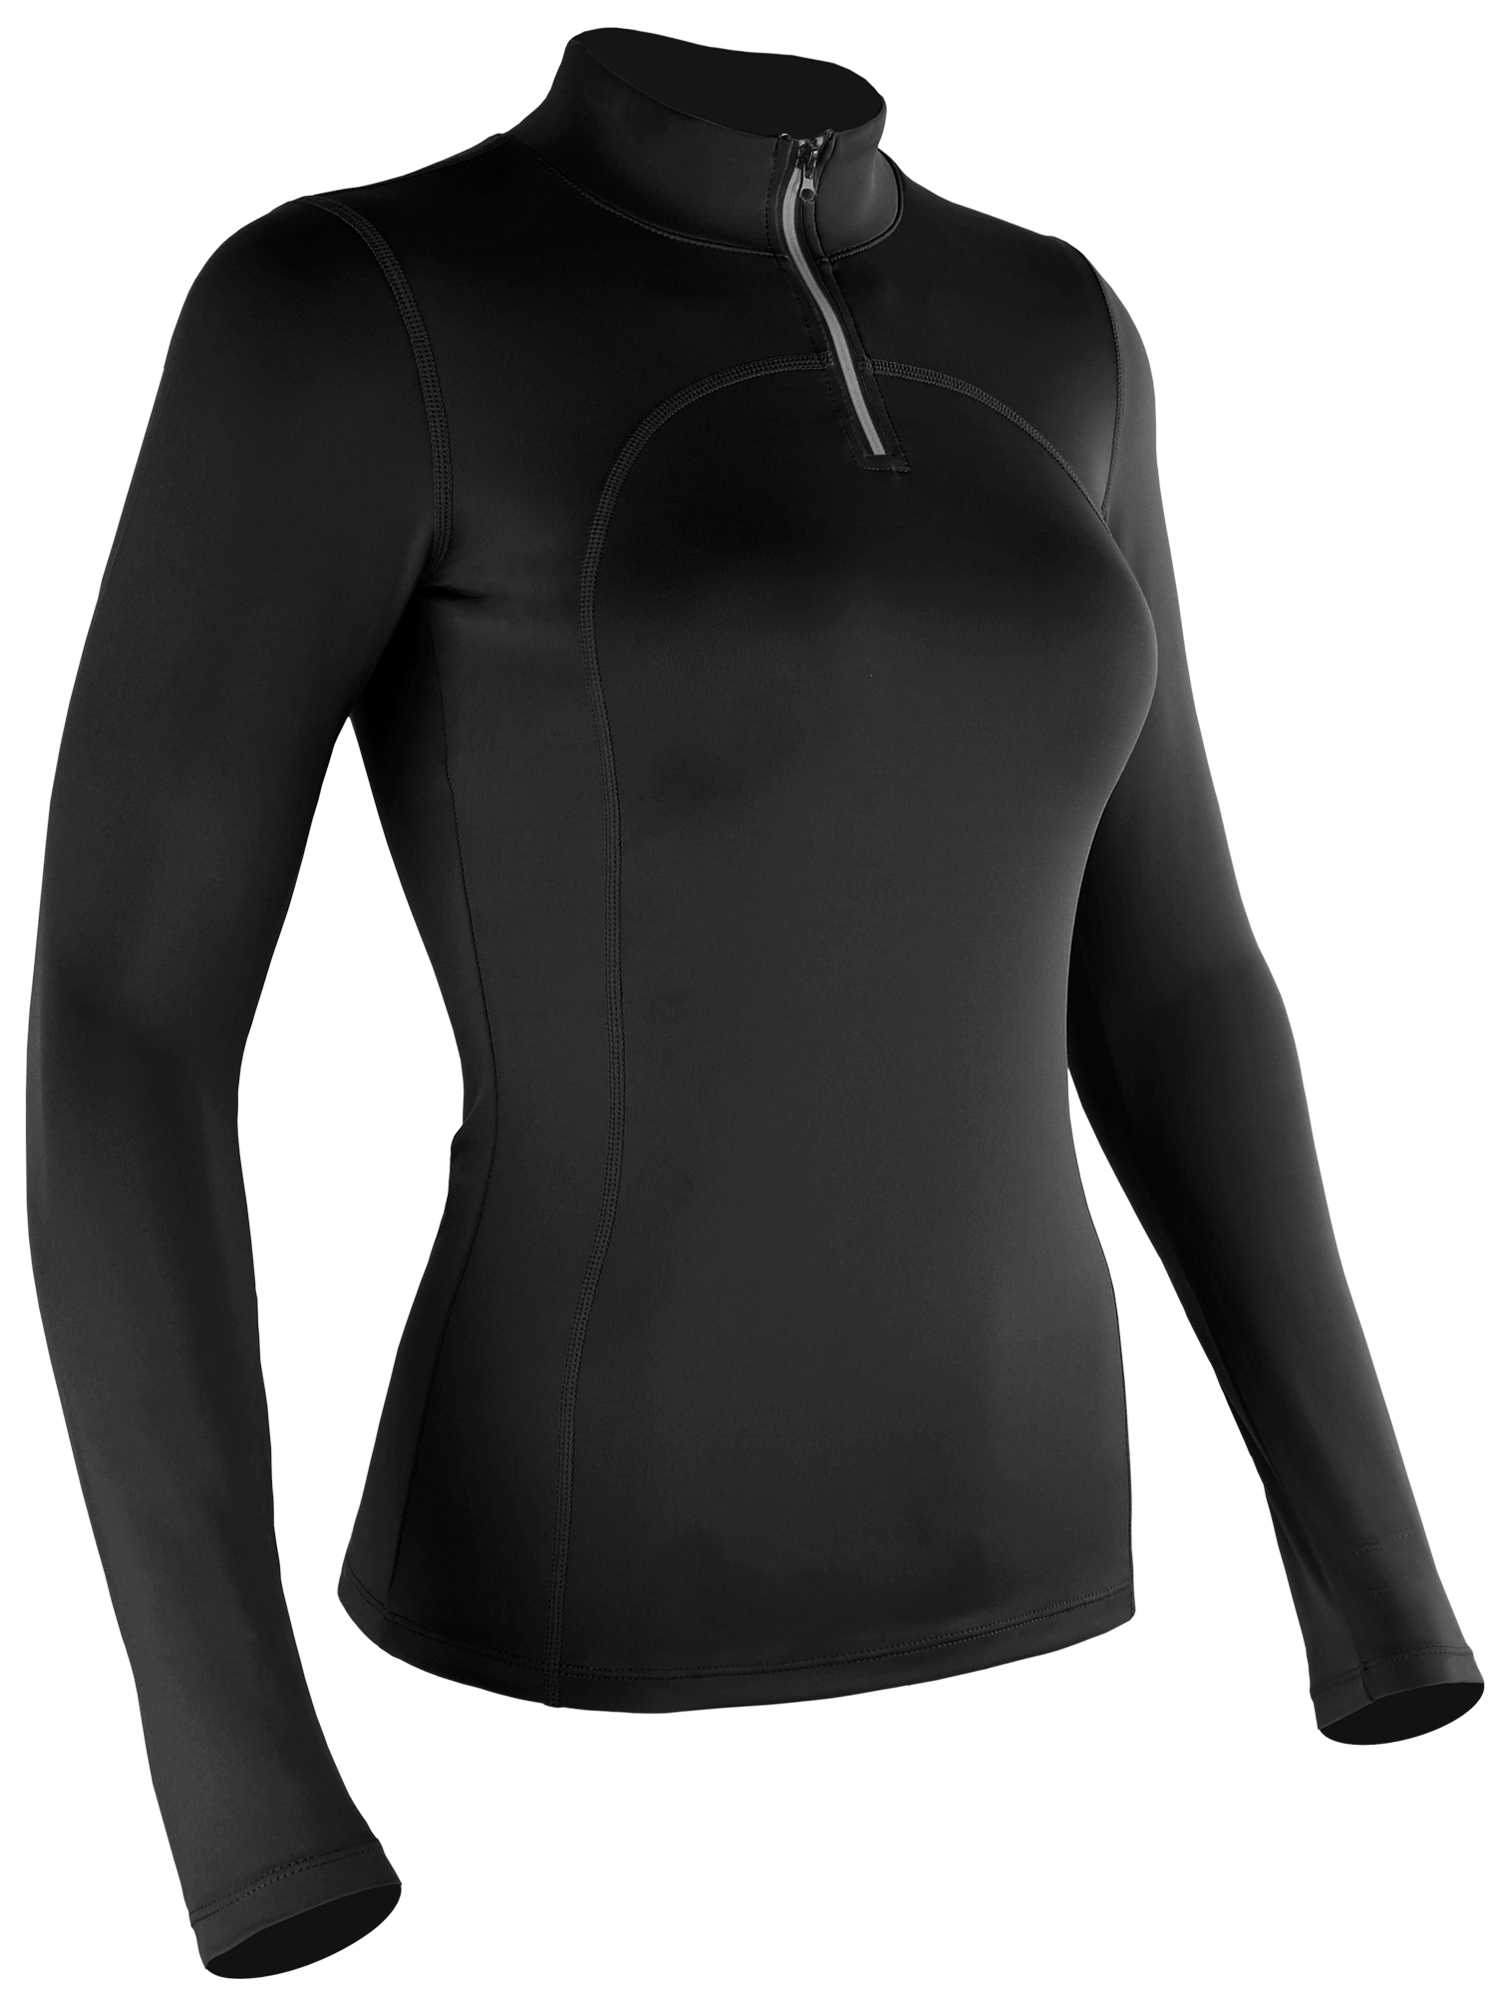 Cadmus Women's Compression Long Sleeve Shirts for Workout Yoga Shirts ...